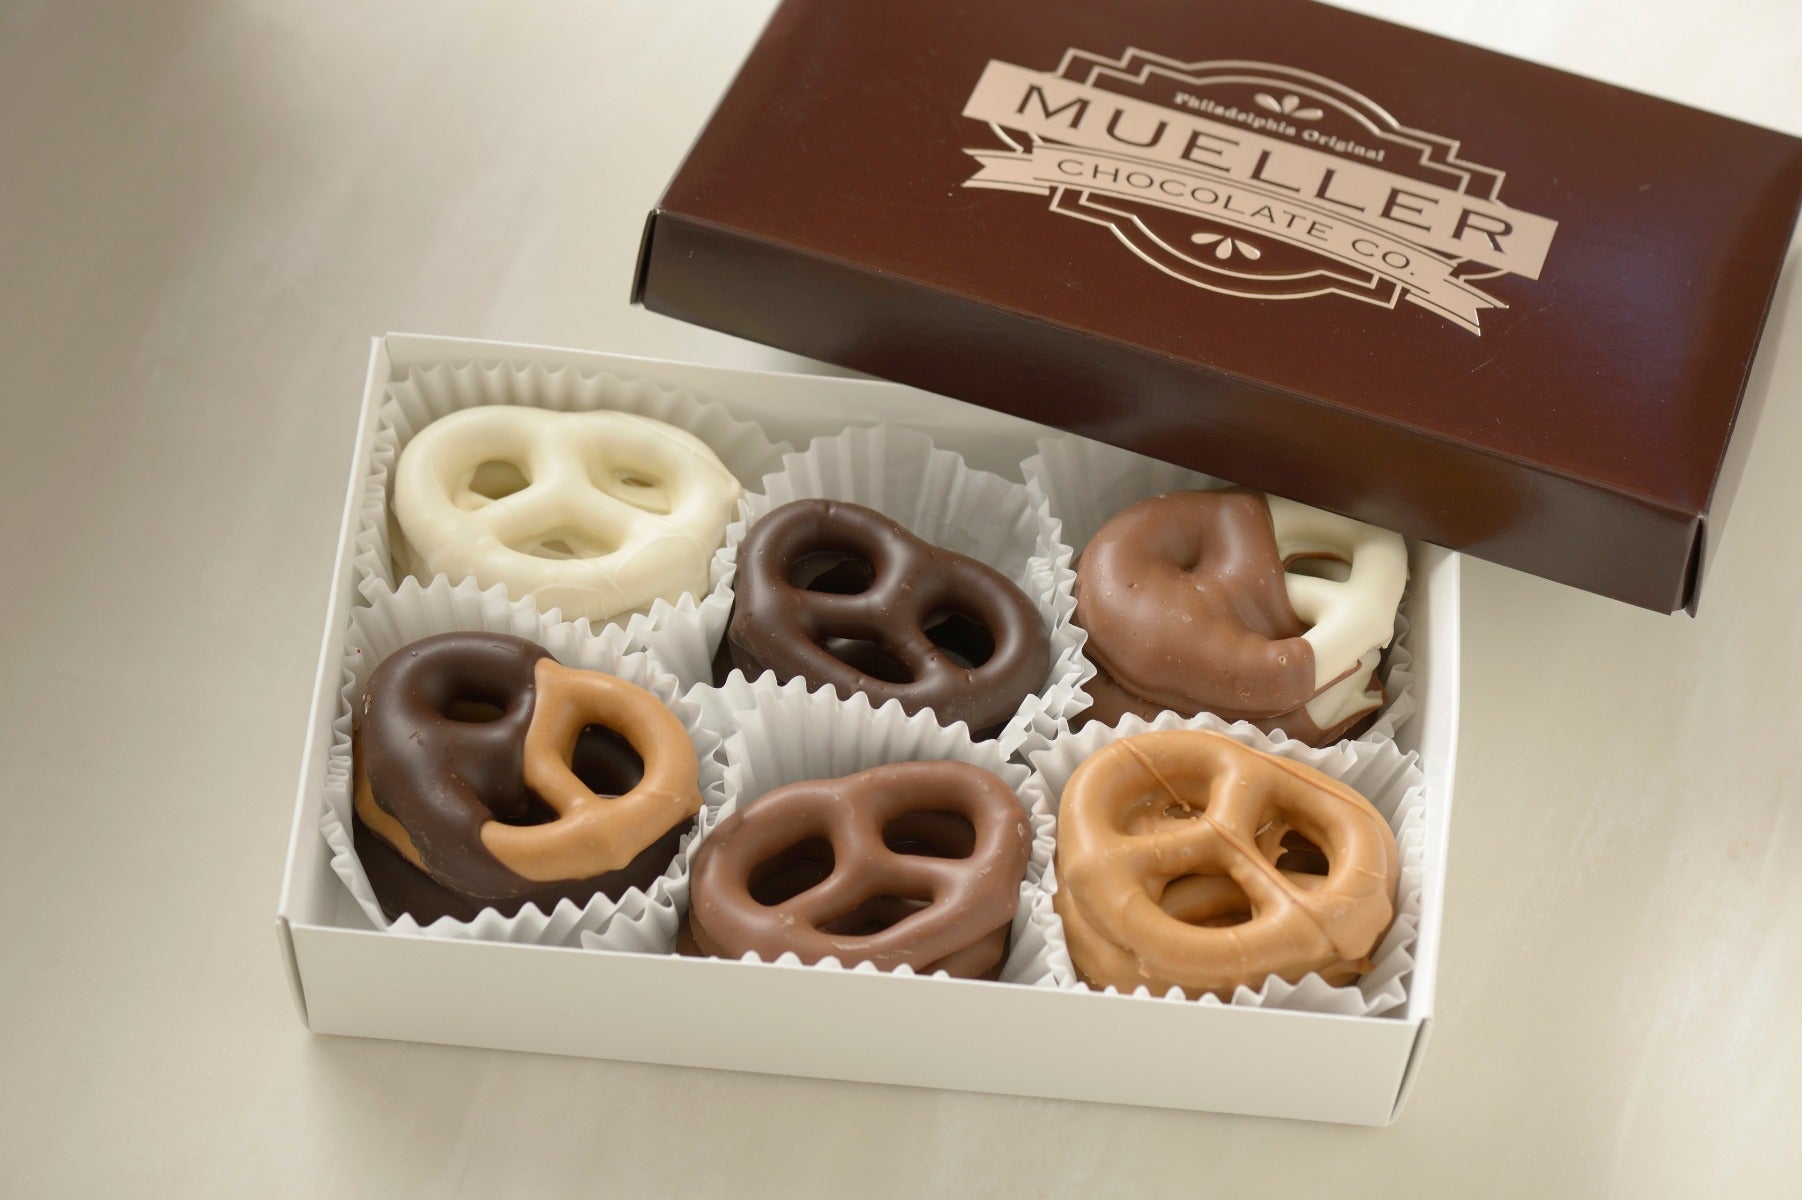 Assorted Chocolate Covered Pretzels | Mueller Chocolate Co.